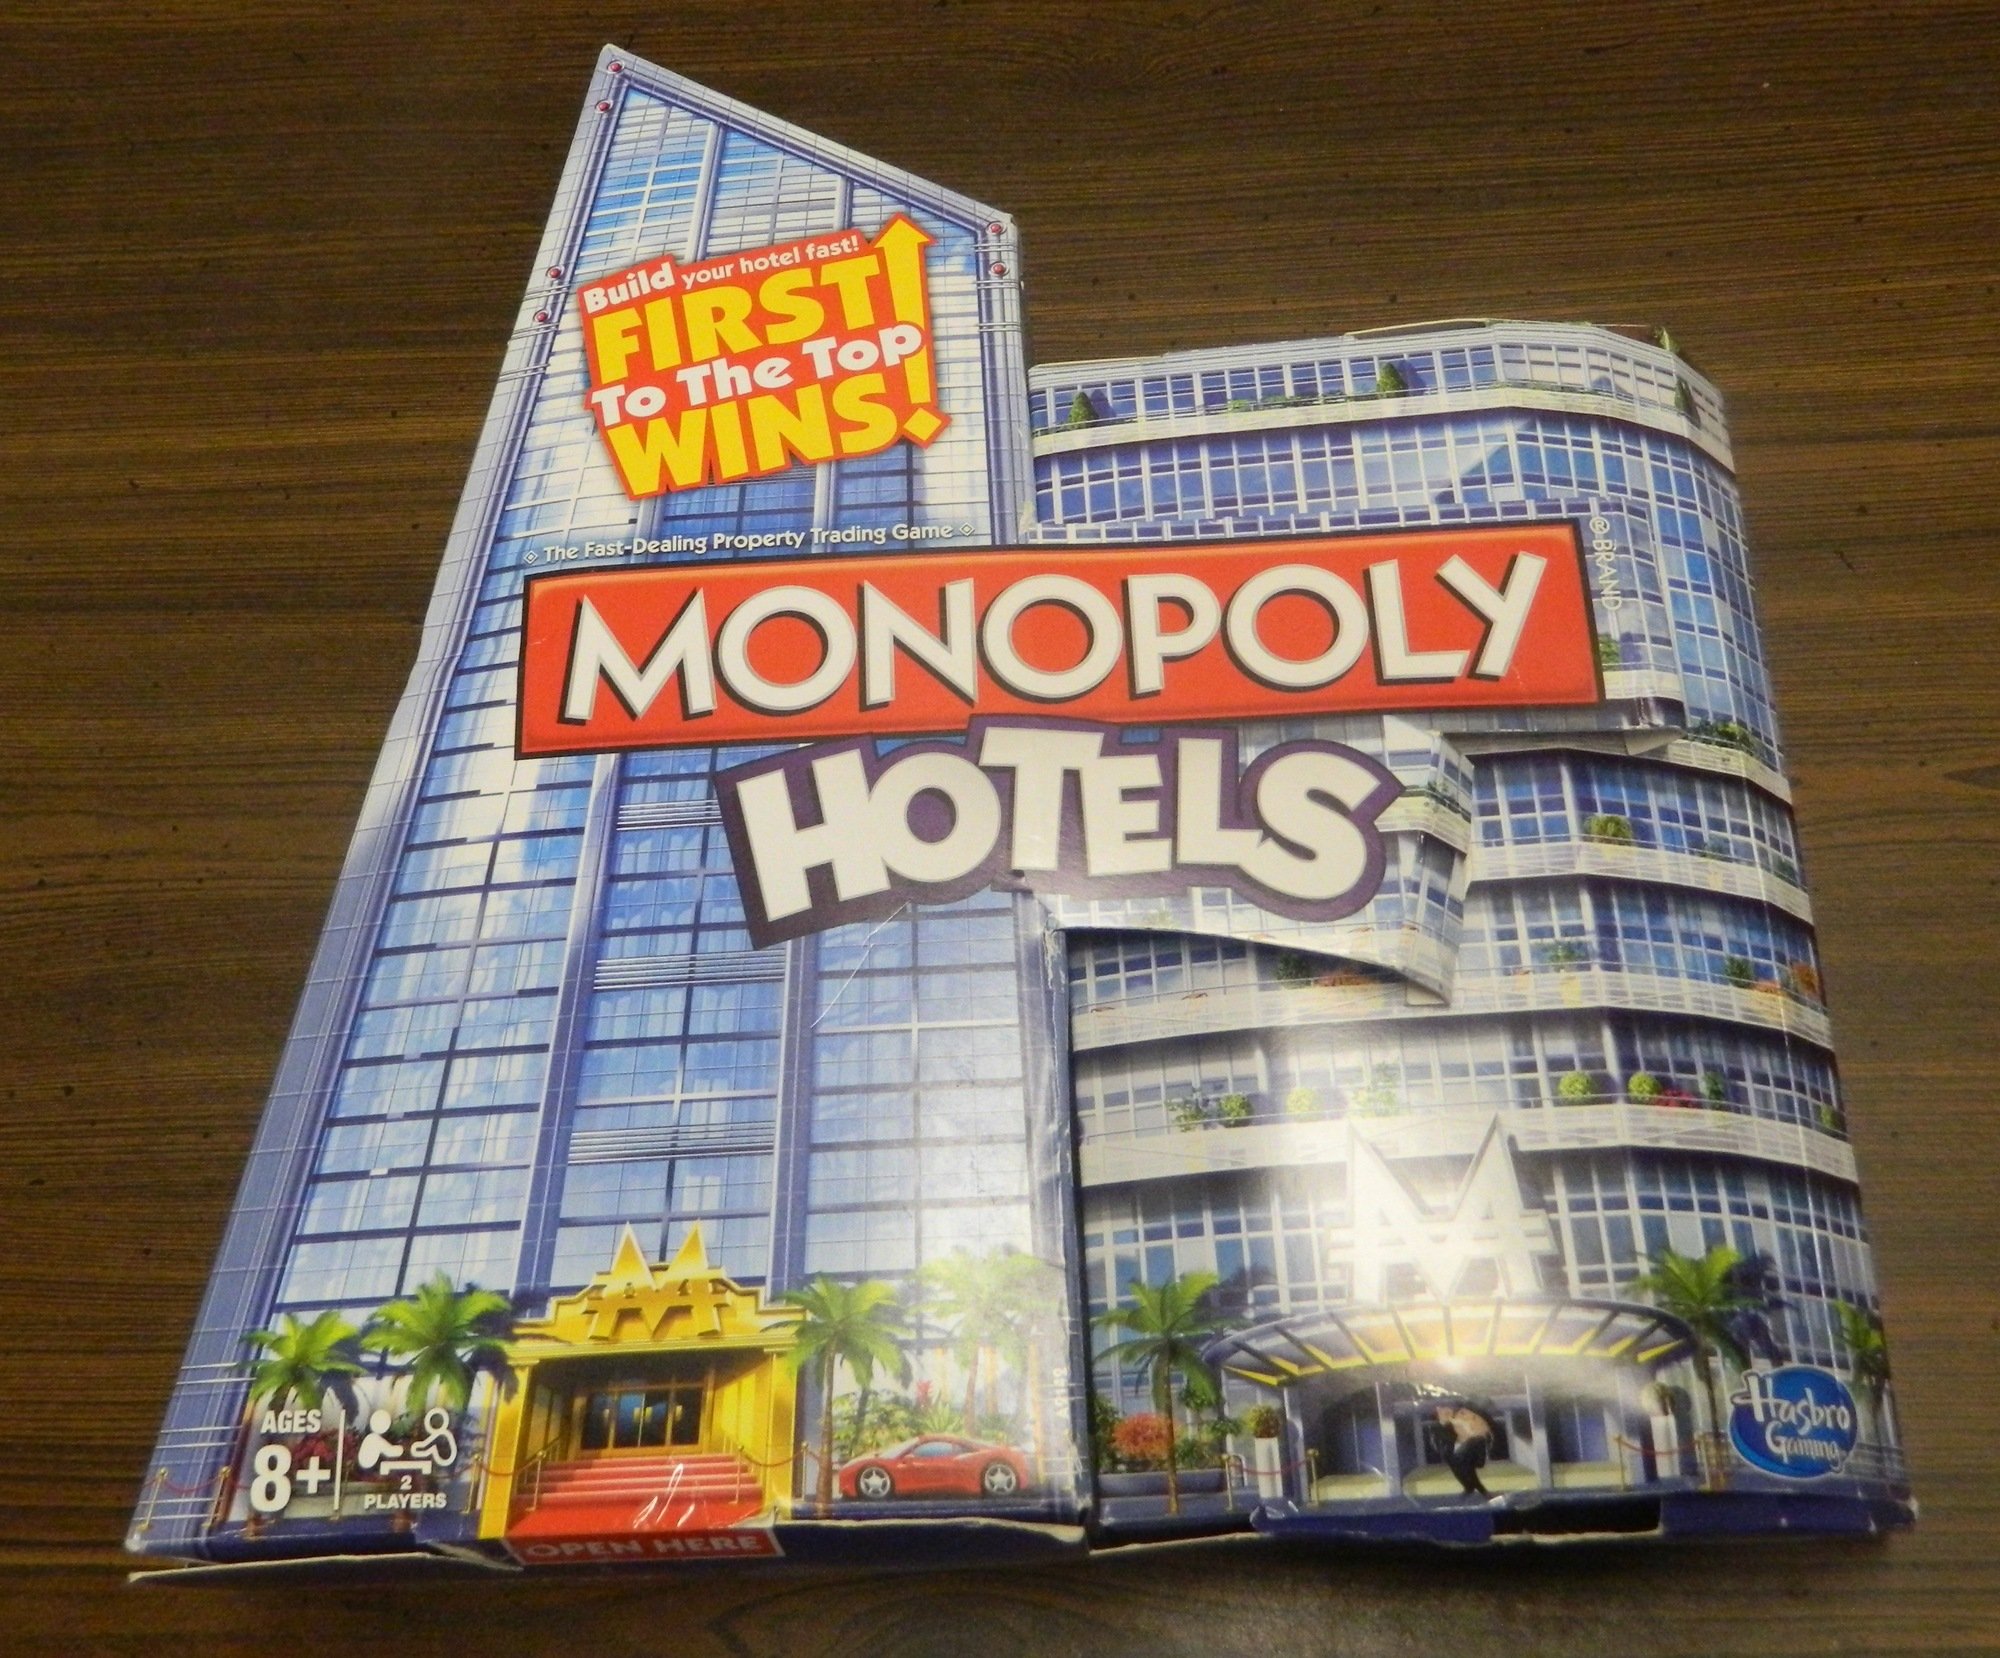 Box for Monopoly Hotels